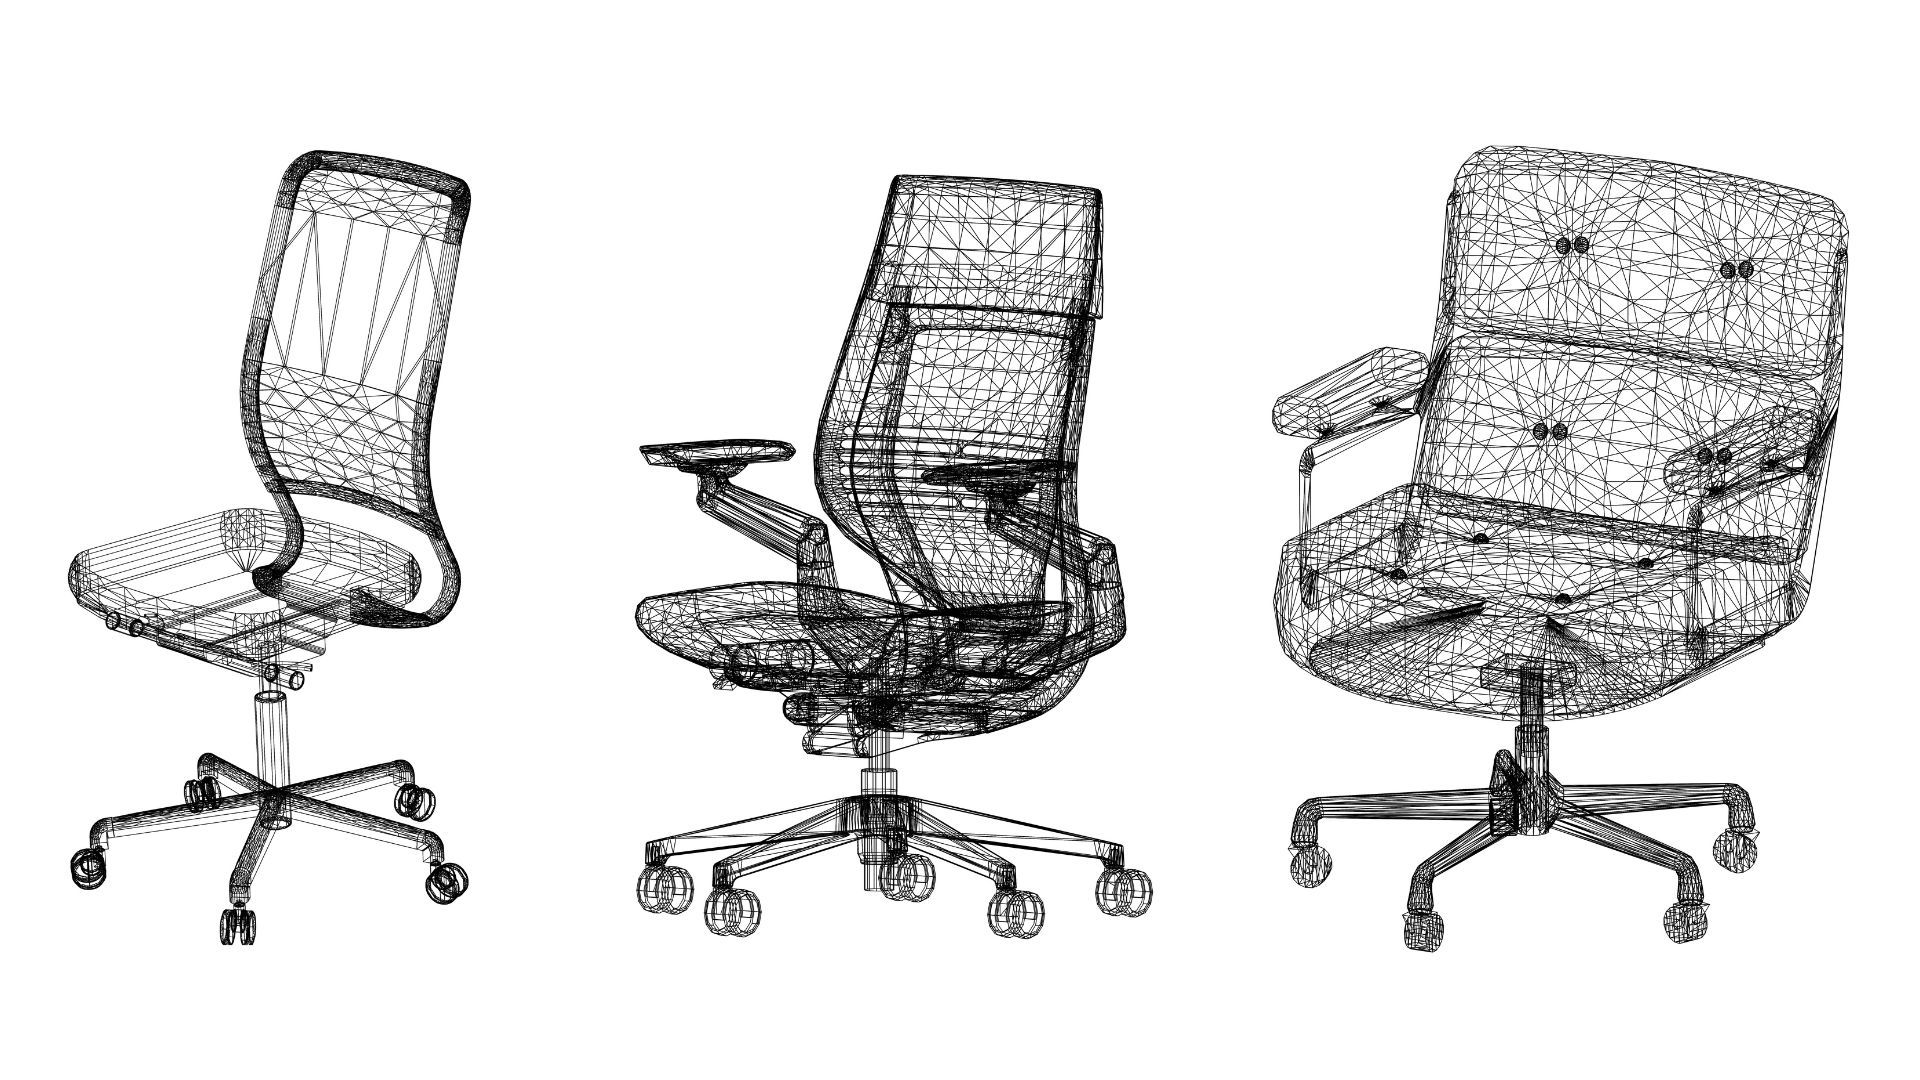 Ergonomic Office Chairs in Today's Workspaces